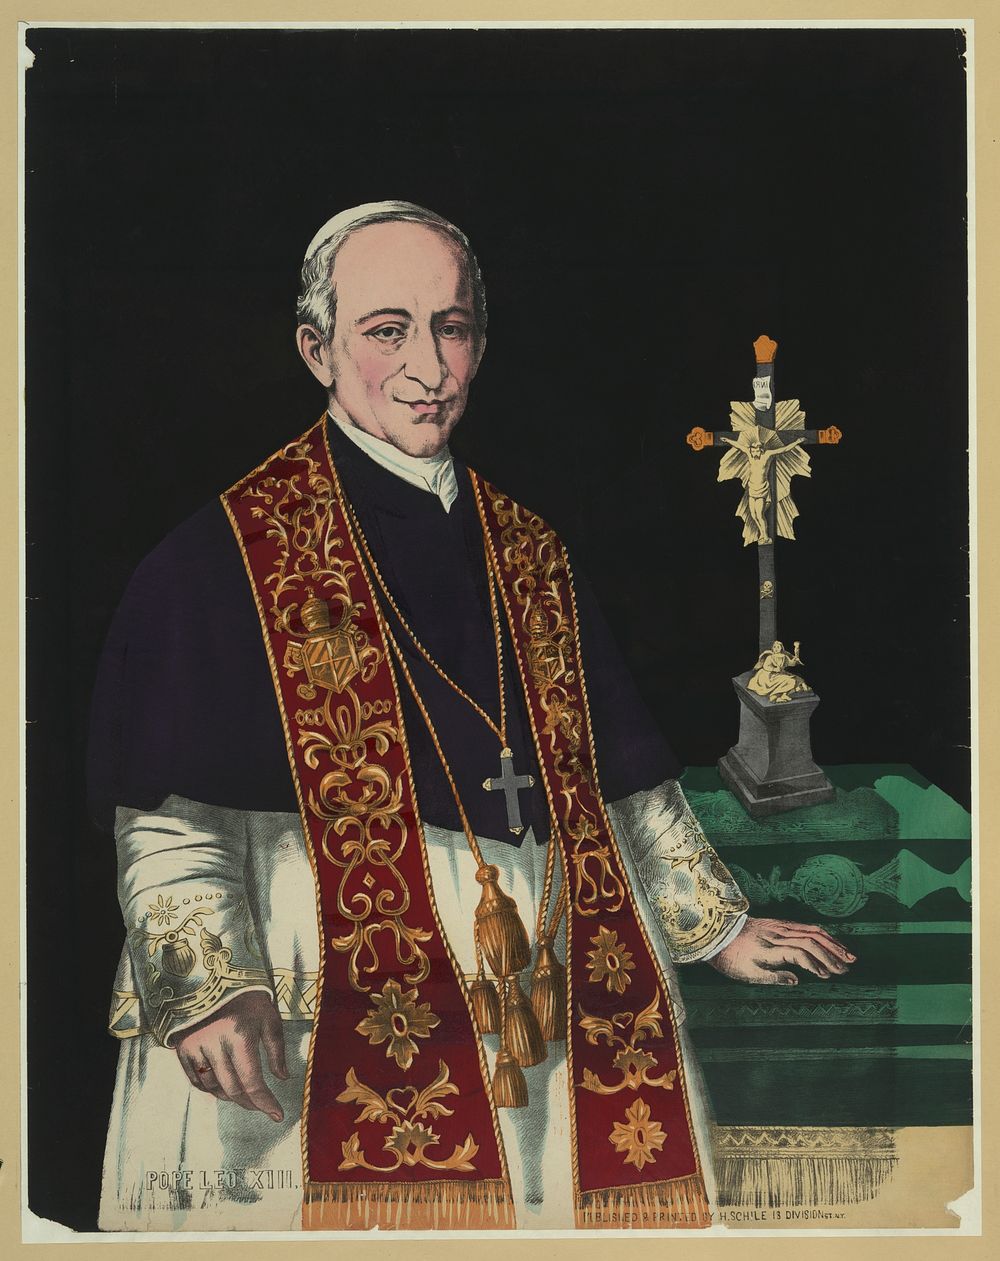 Pope Leo XIII by Schile, H. (Henry)